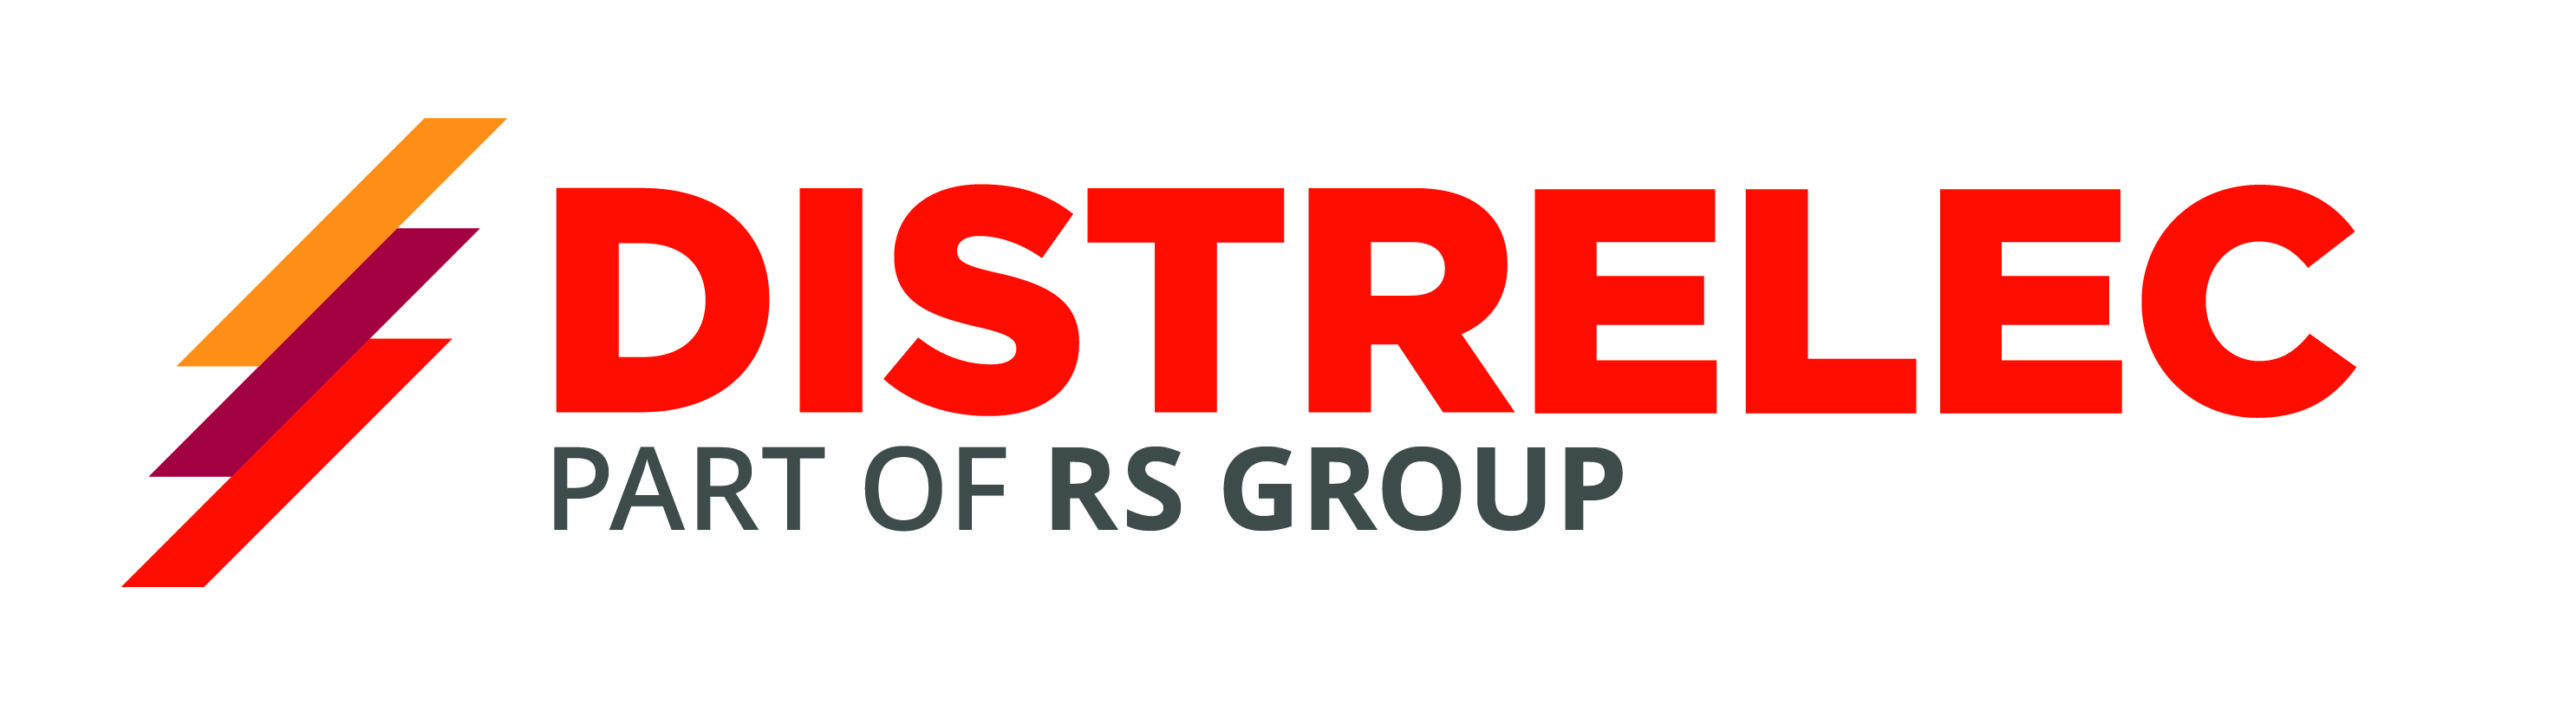 Featured image for “Distrelec Part of RS Group”